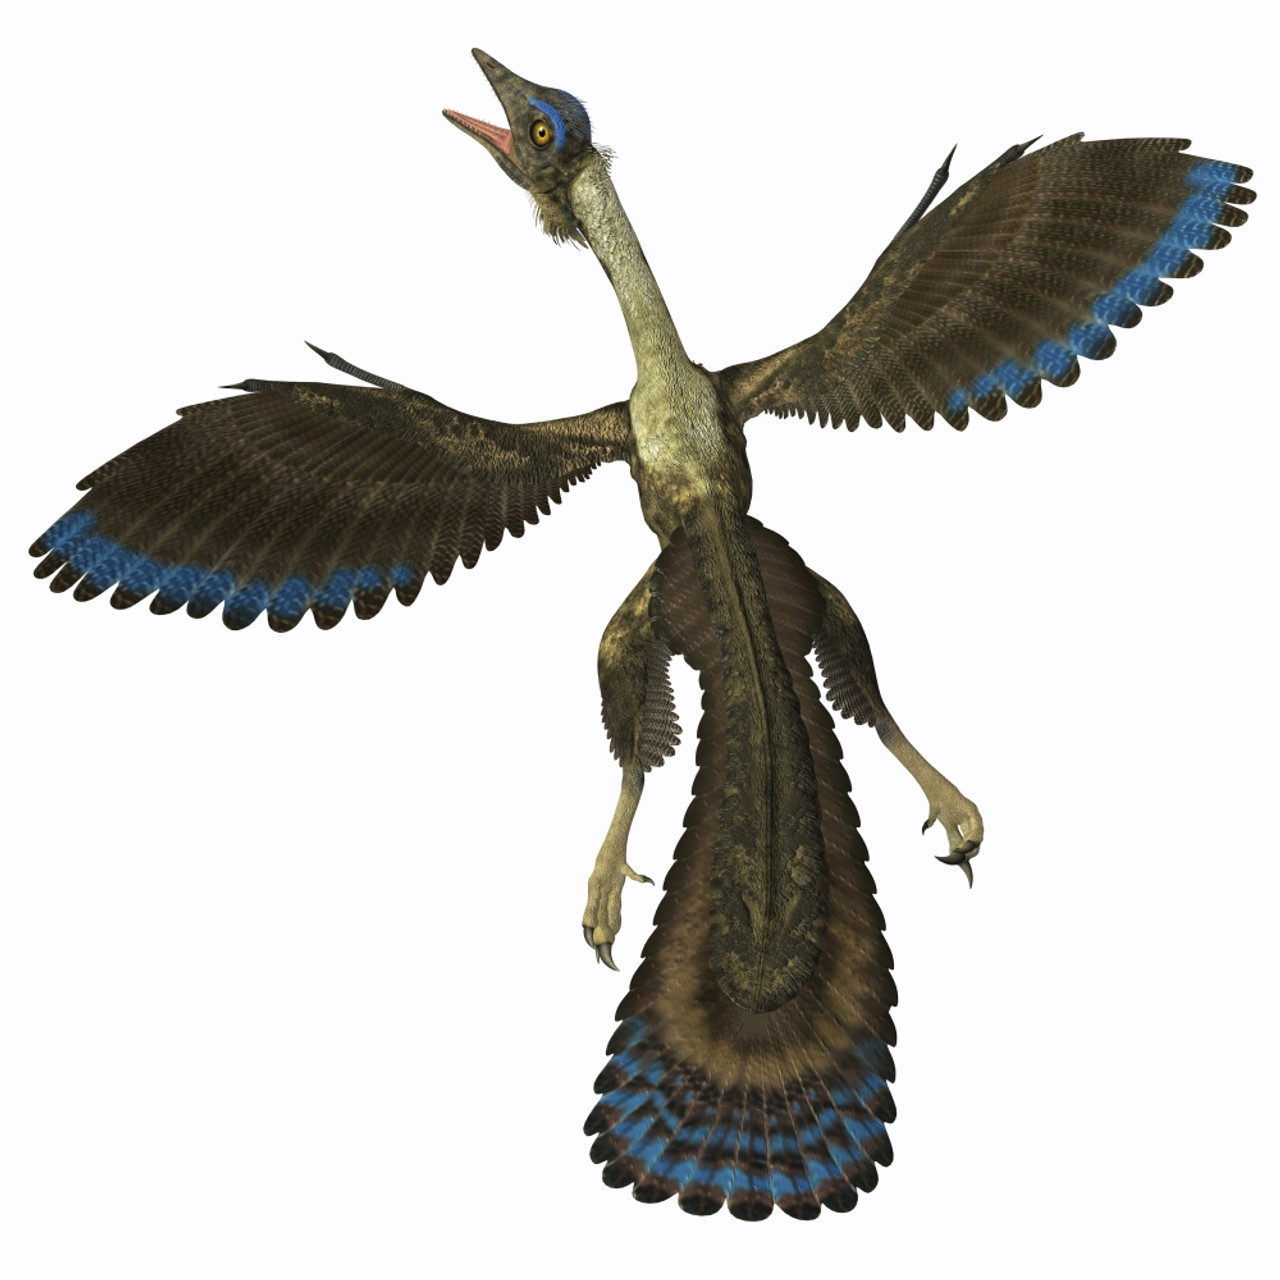 Archaeopteryx is known as the earliest bird and was a bridge species ...